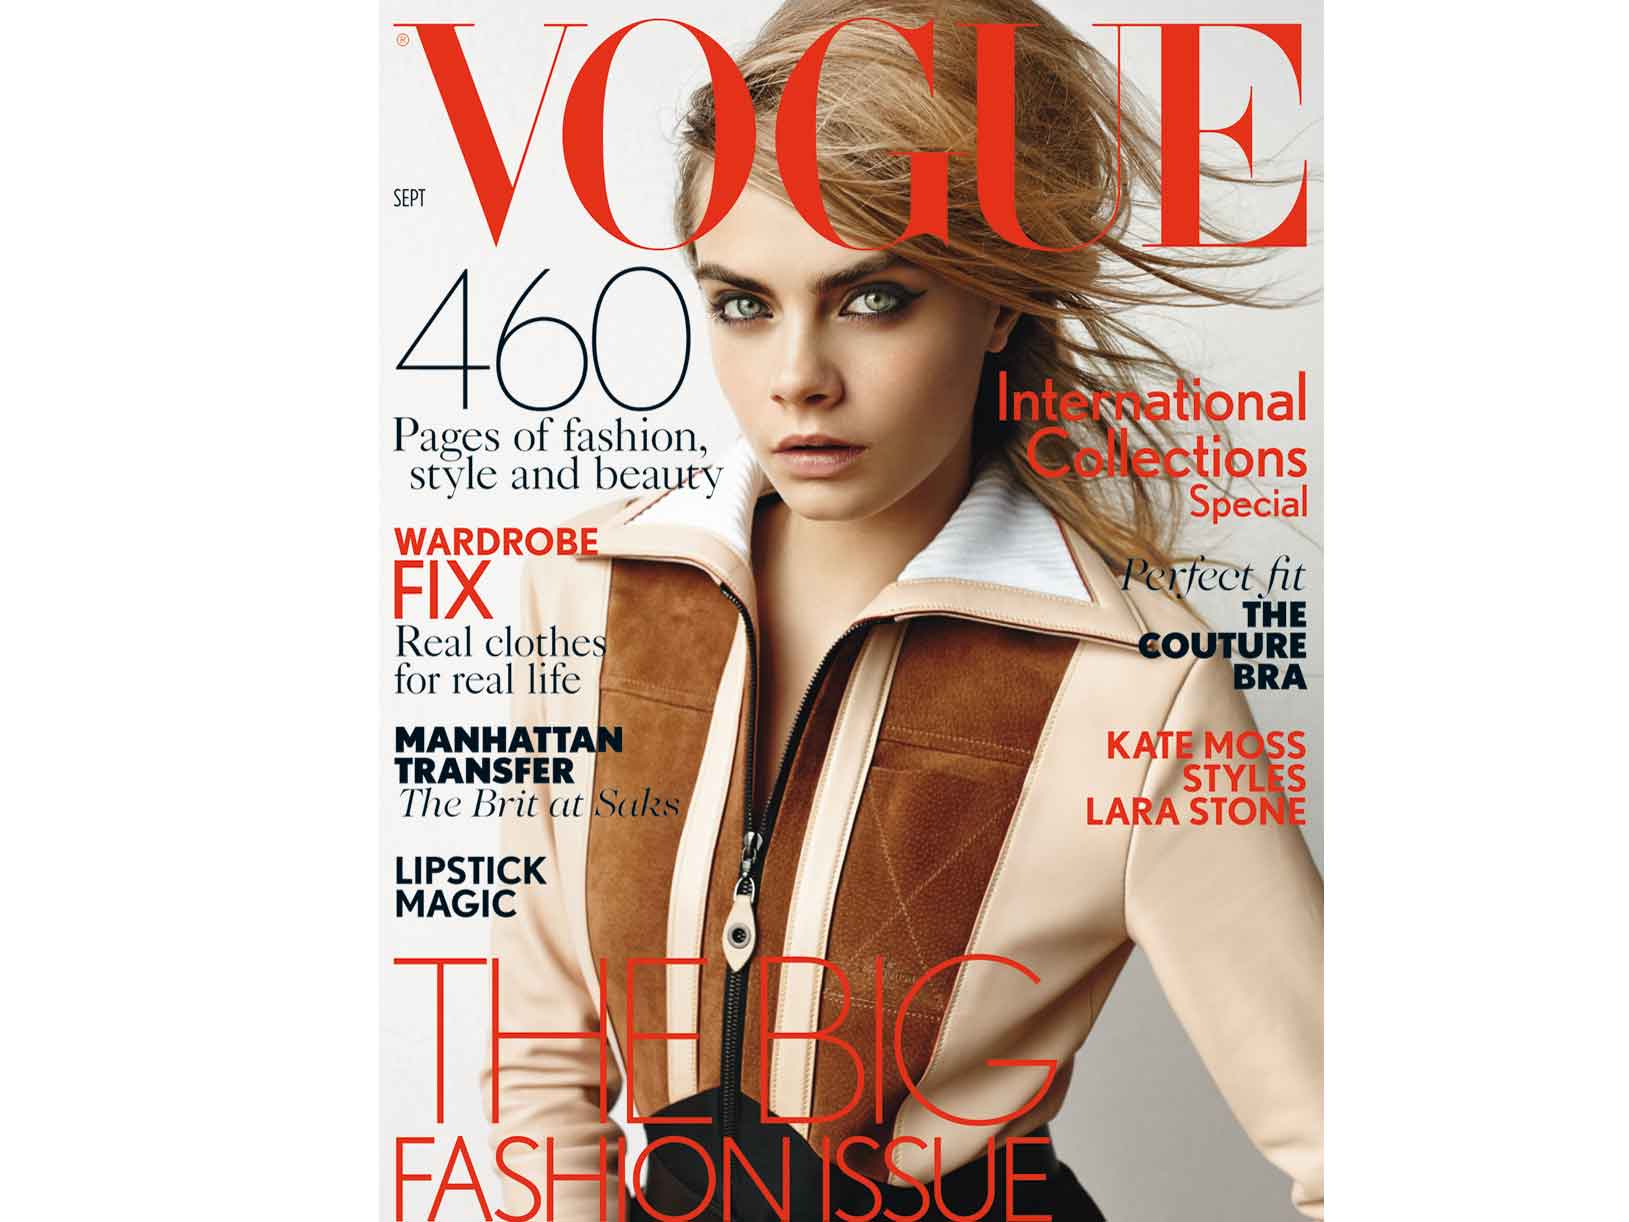 Cara Delevingne on the cover of Vogue's September 2014 issue